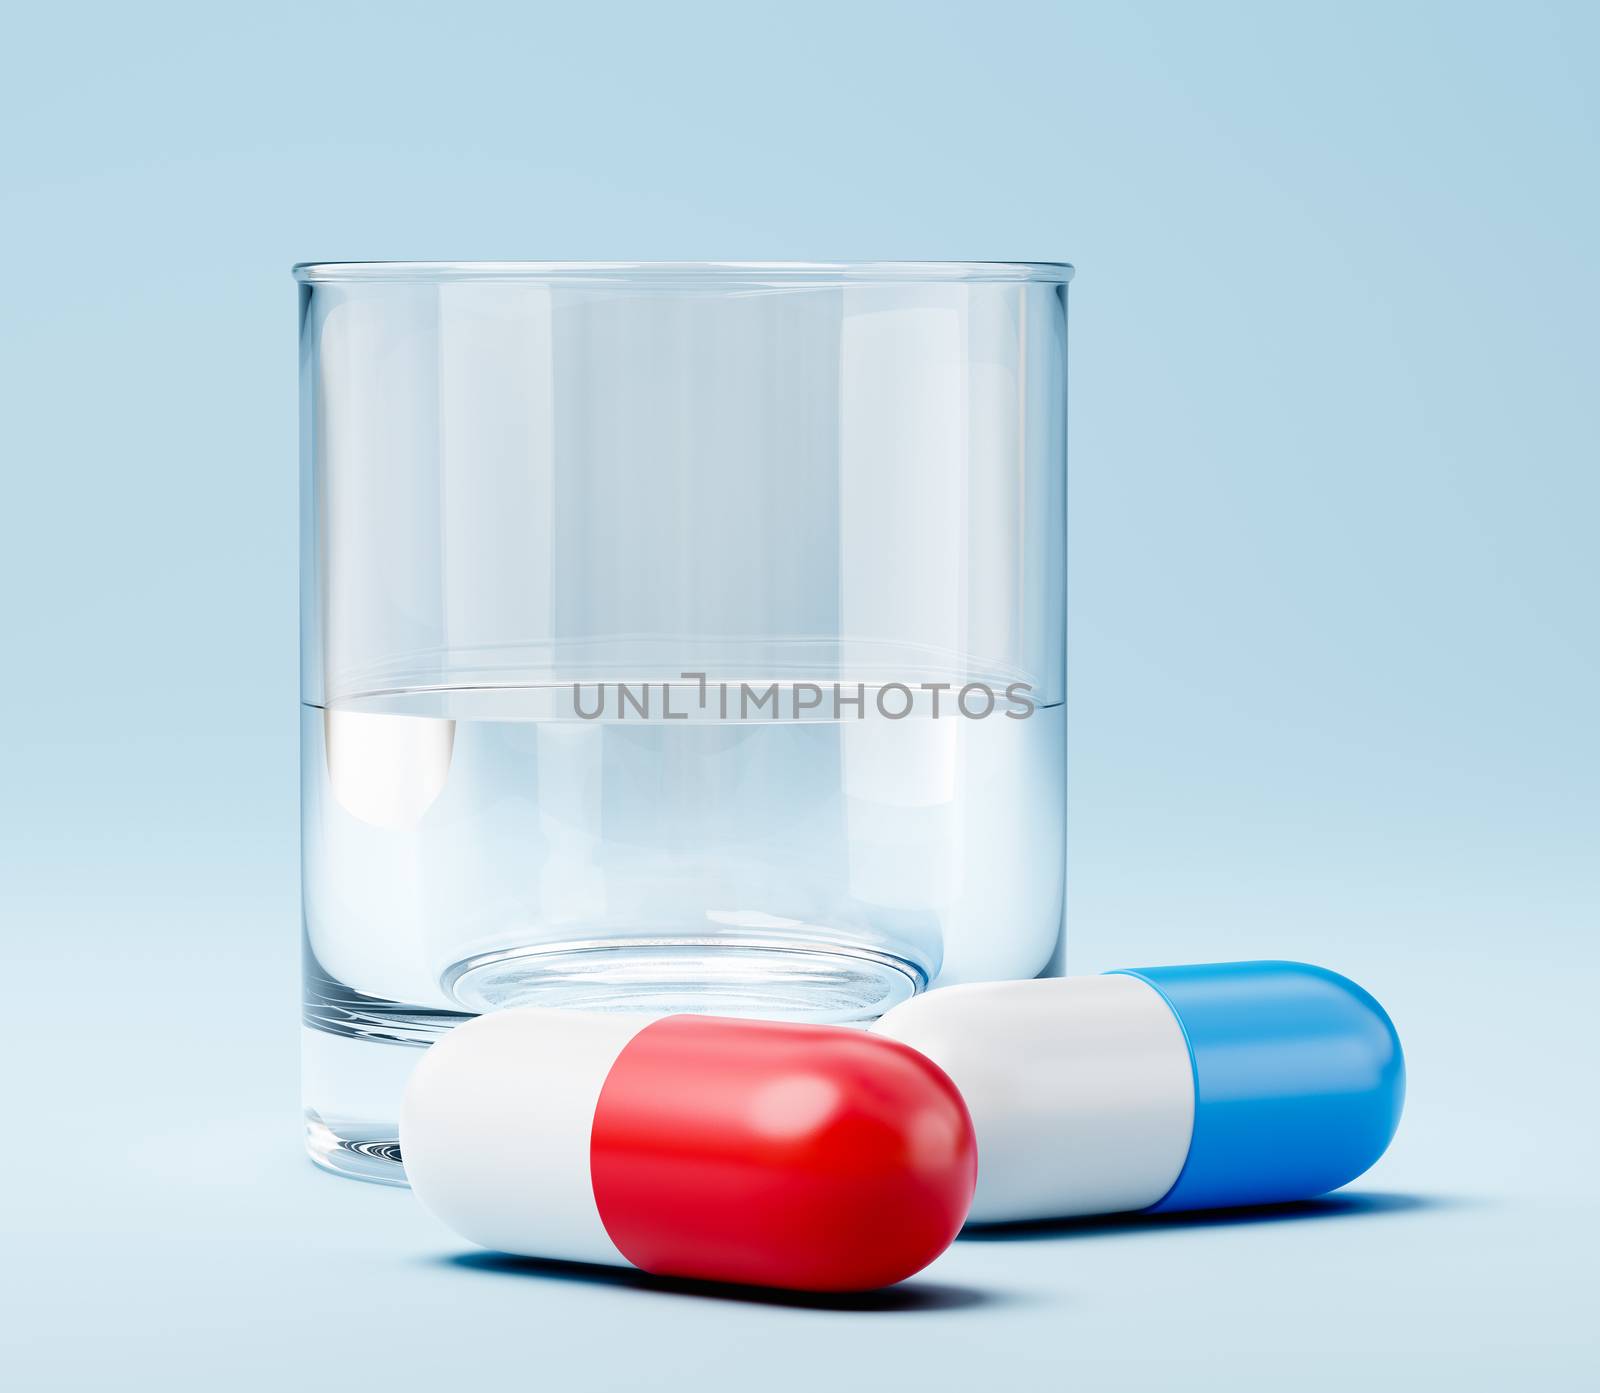 Two Red and Blue Pills and a Glass of Water on Light Blue Background 3D Illustration